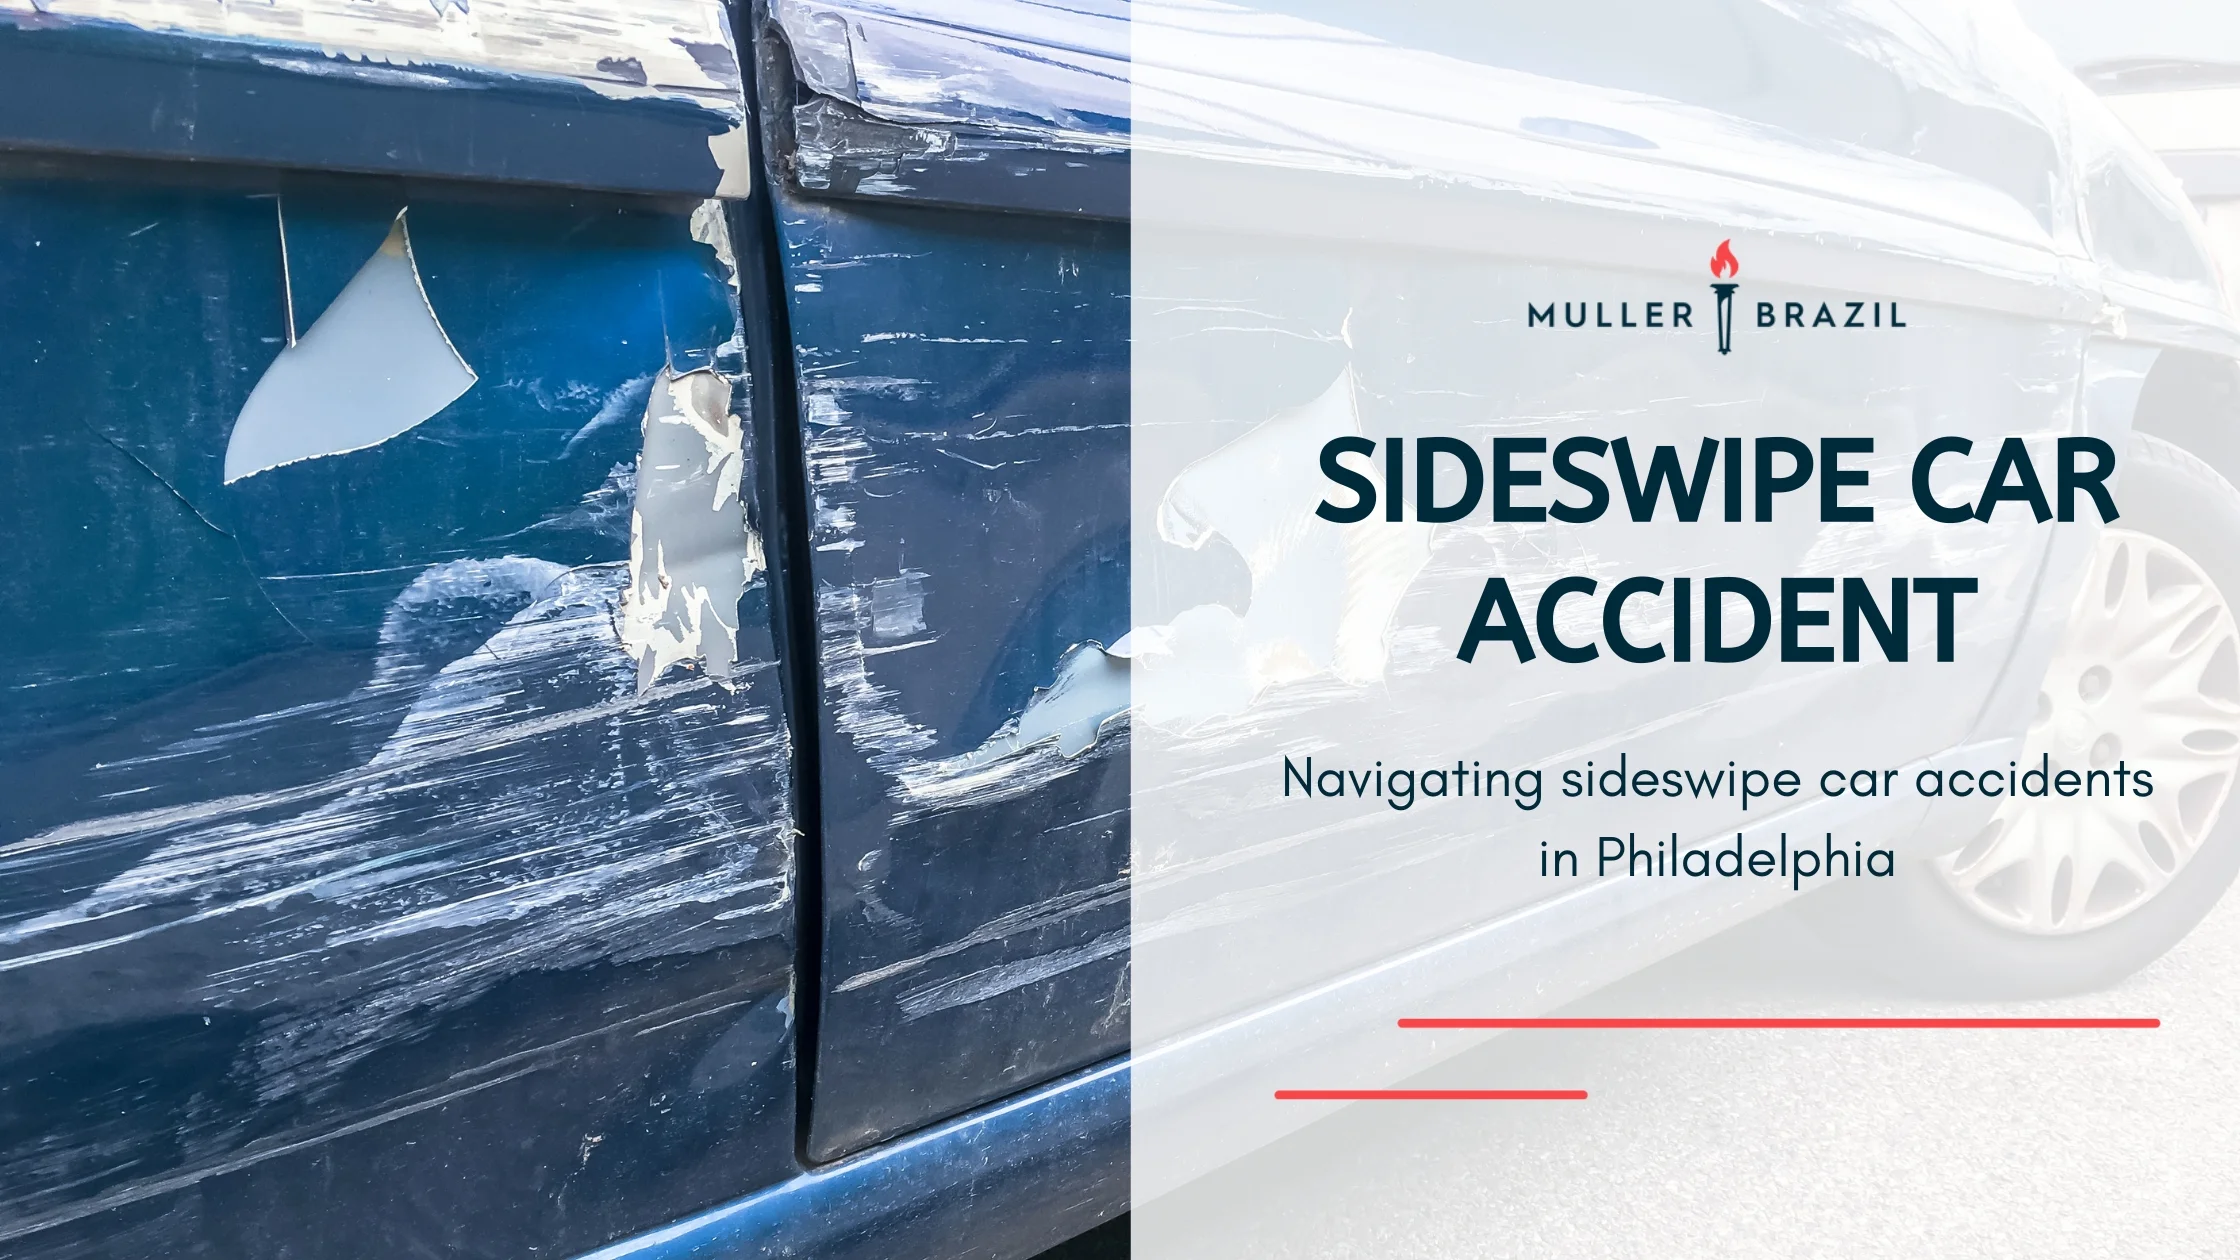 Blog featured image of a black car with scratches and dents on it and a caption that says “Sideswipe Car Accident